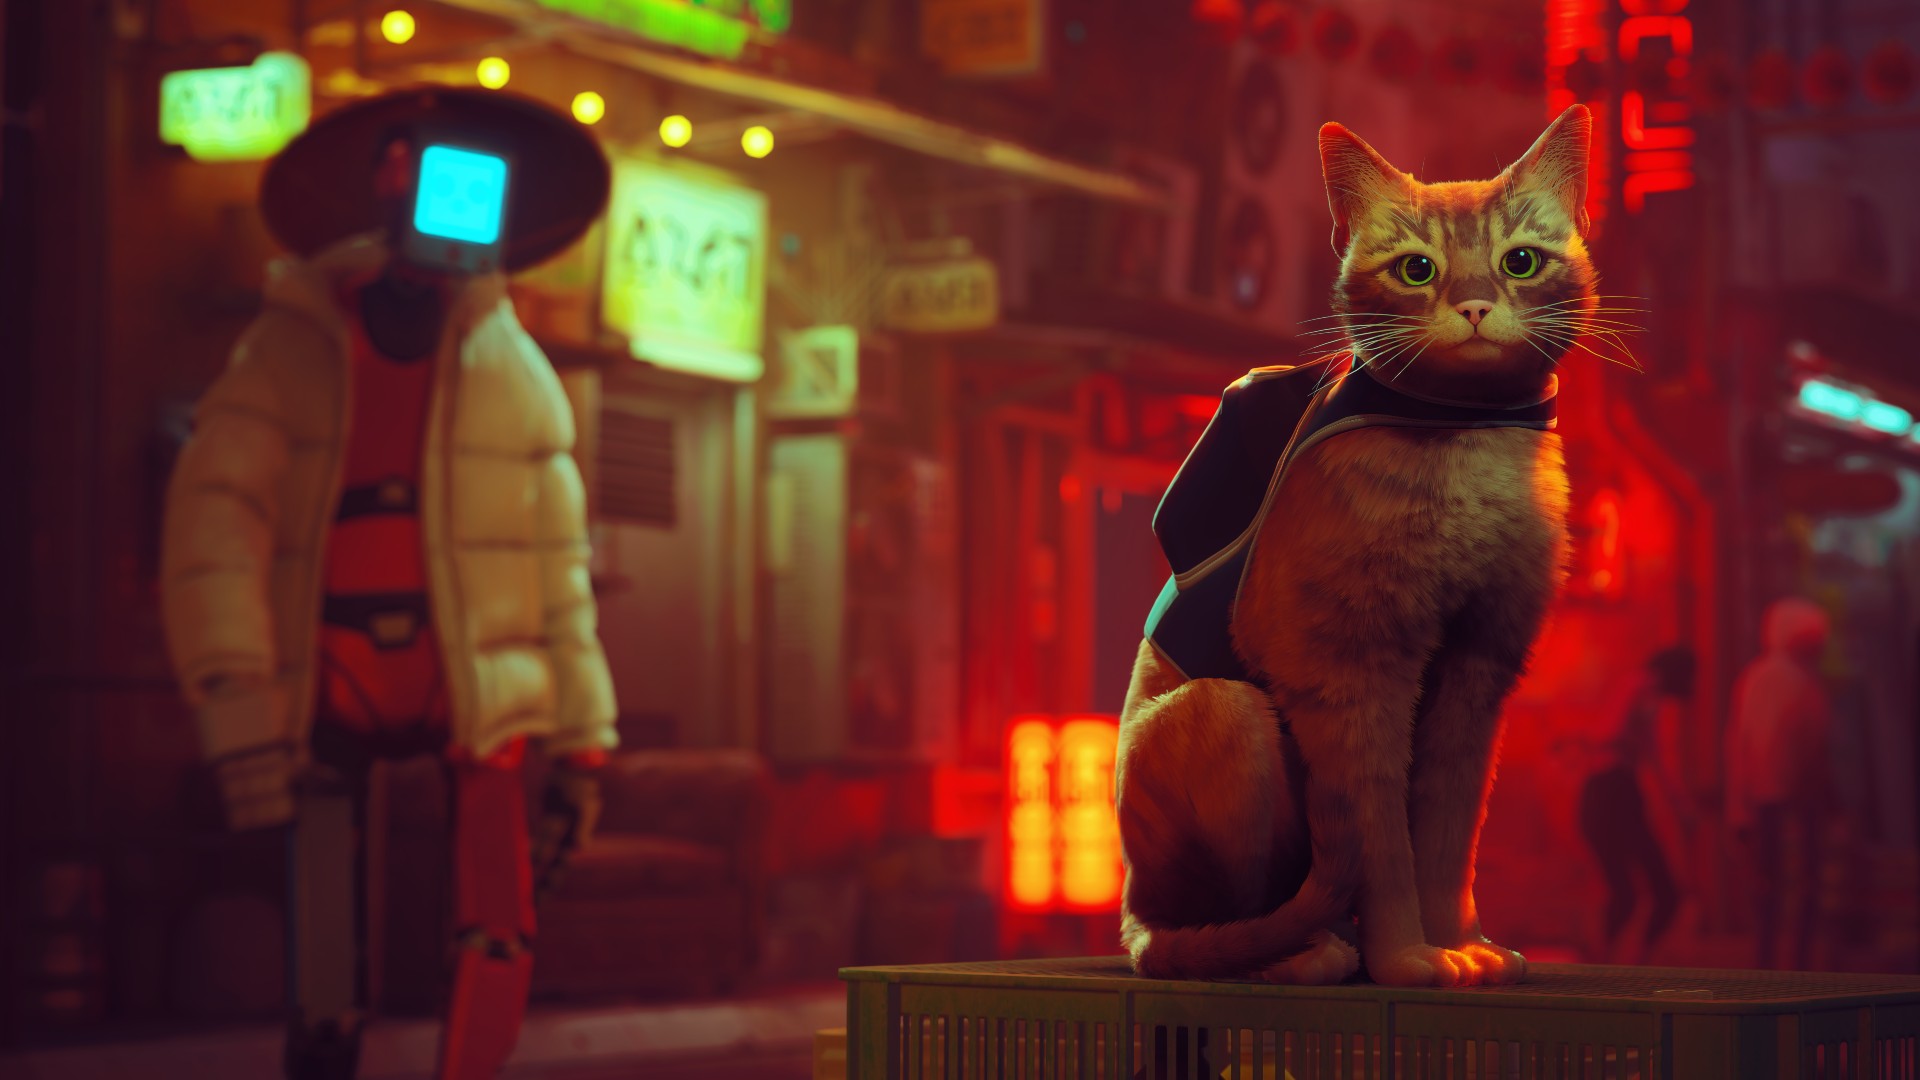 A Video Game Where You Play a Stray Cat Navigating a Futuristic Cybercity  in Order to Find Way Your Home